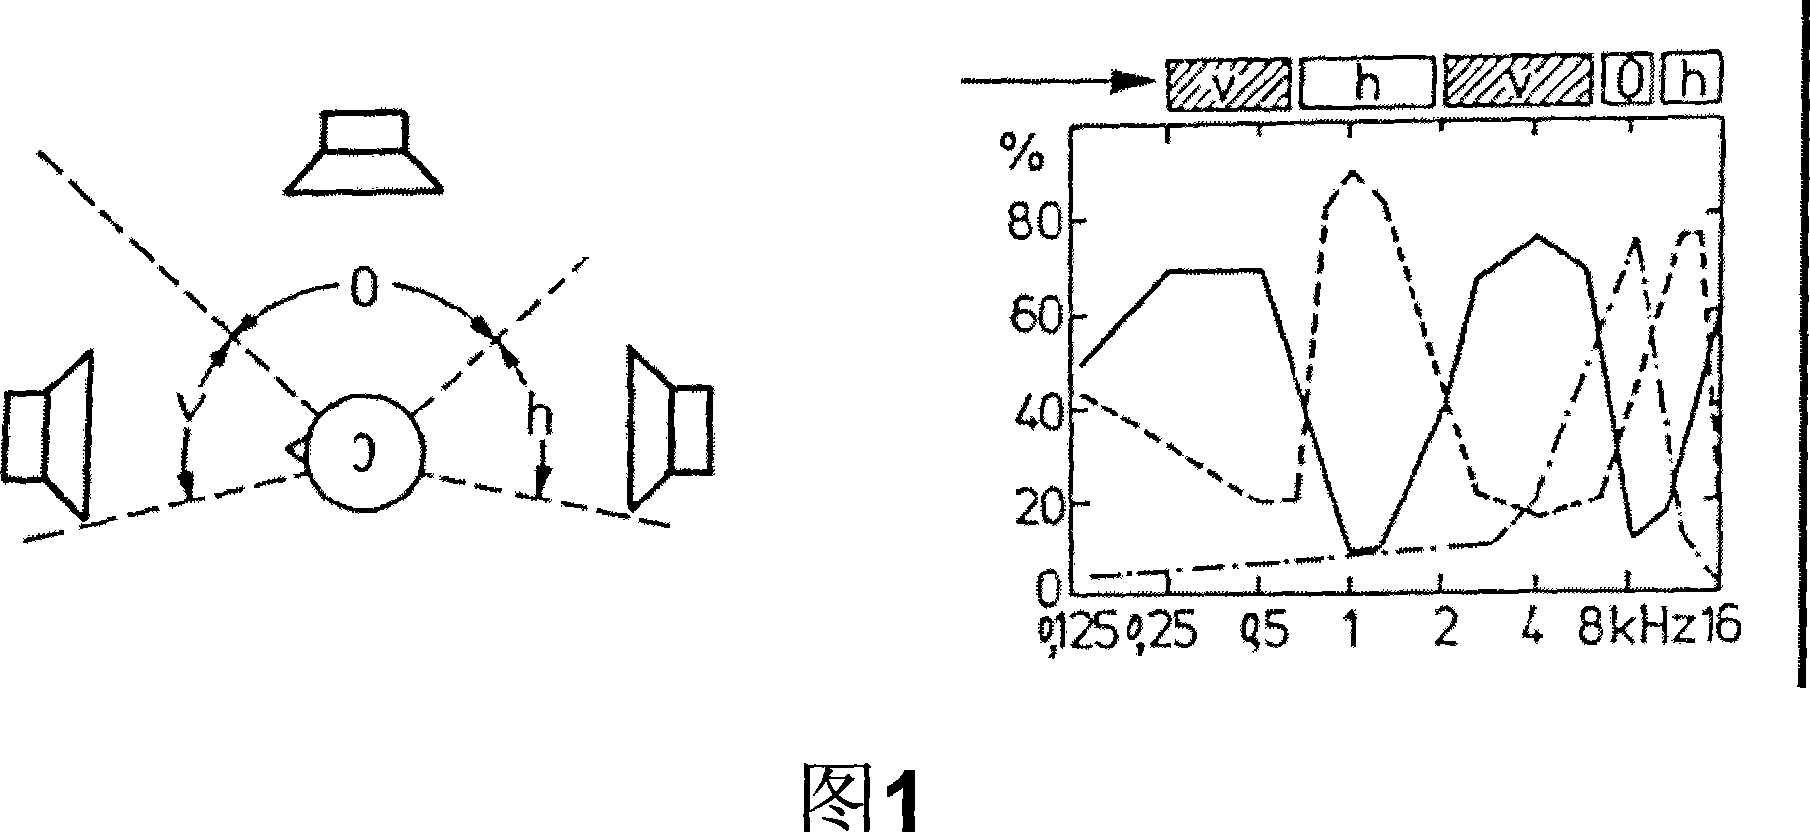 Method for automatically equalizing a sound system